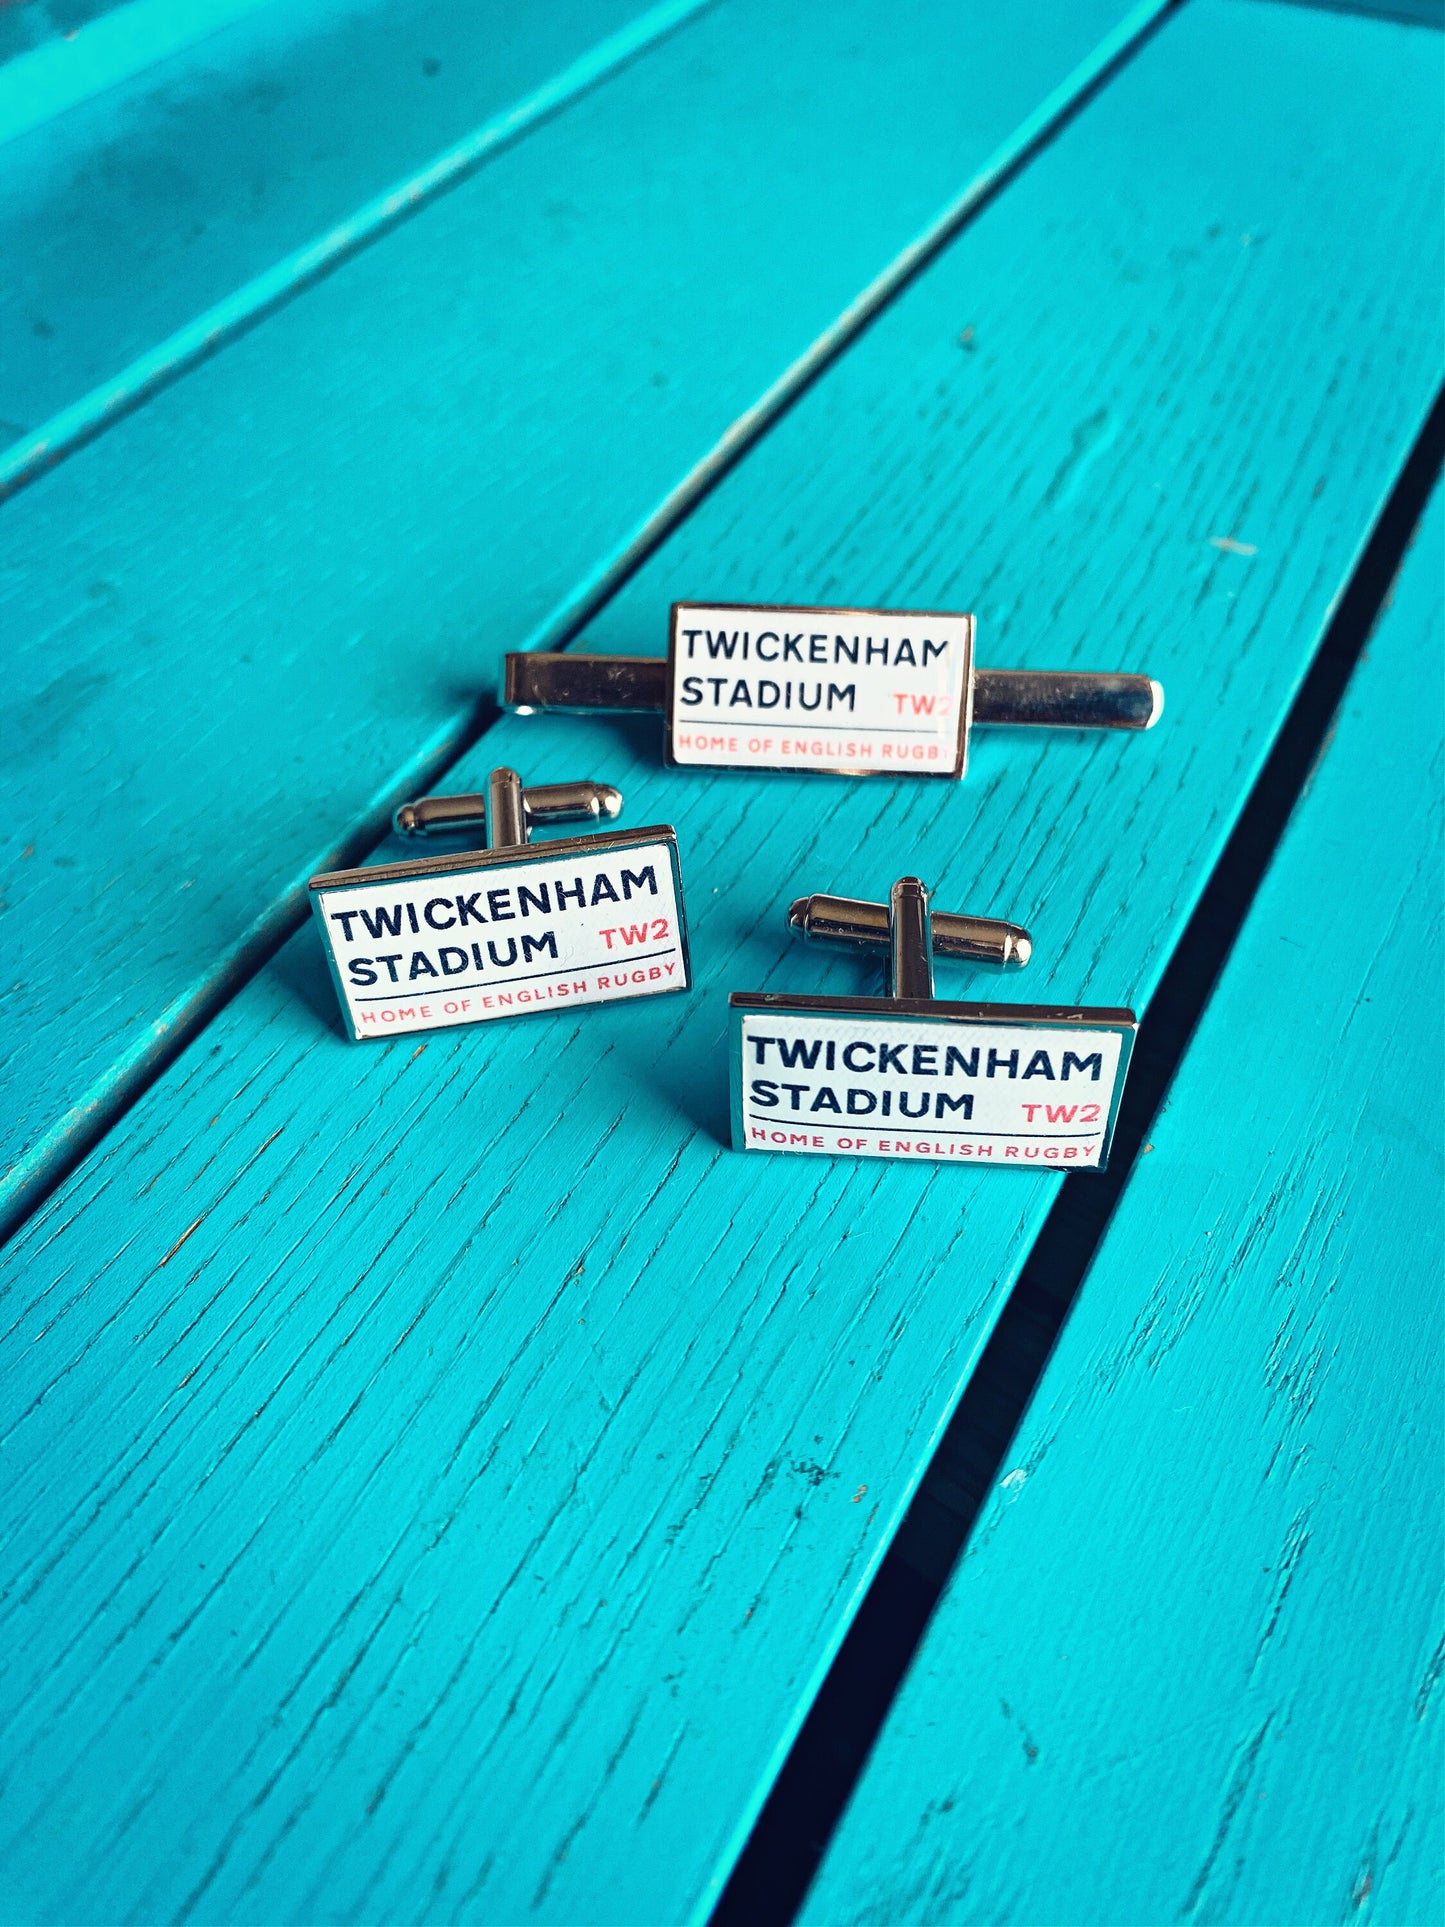 England Rugby Stadium Cufflinks. Twickenham Stadium. Gift for Rugby Fan. Road Sign Tie Bar Personalised. Christmas. Swing Low Sweet Chariot.